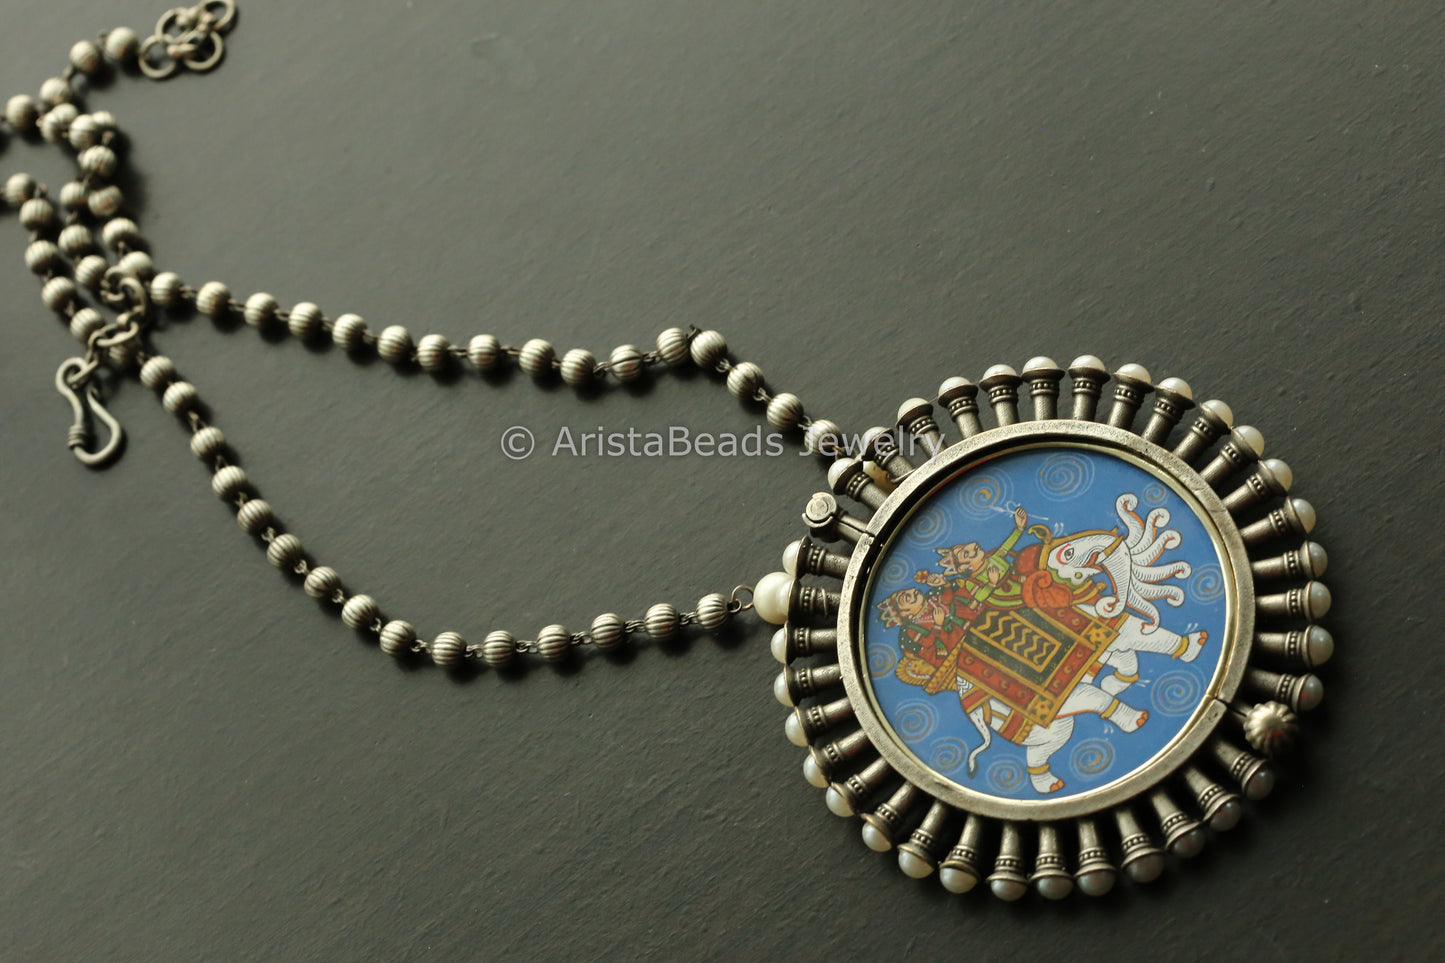 Oxidized Hand-Painted  Necklace - Design 2